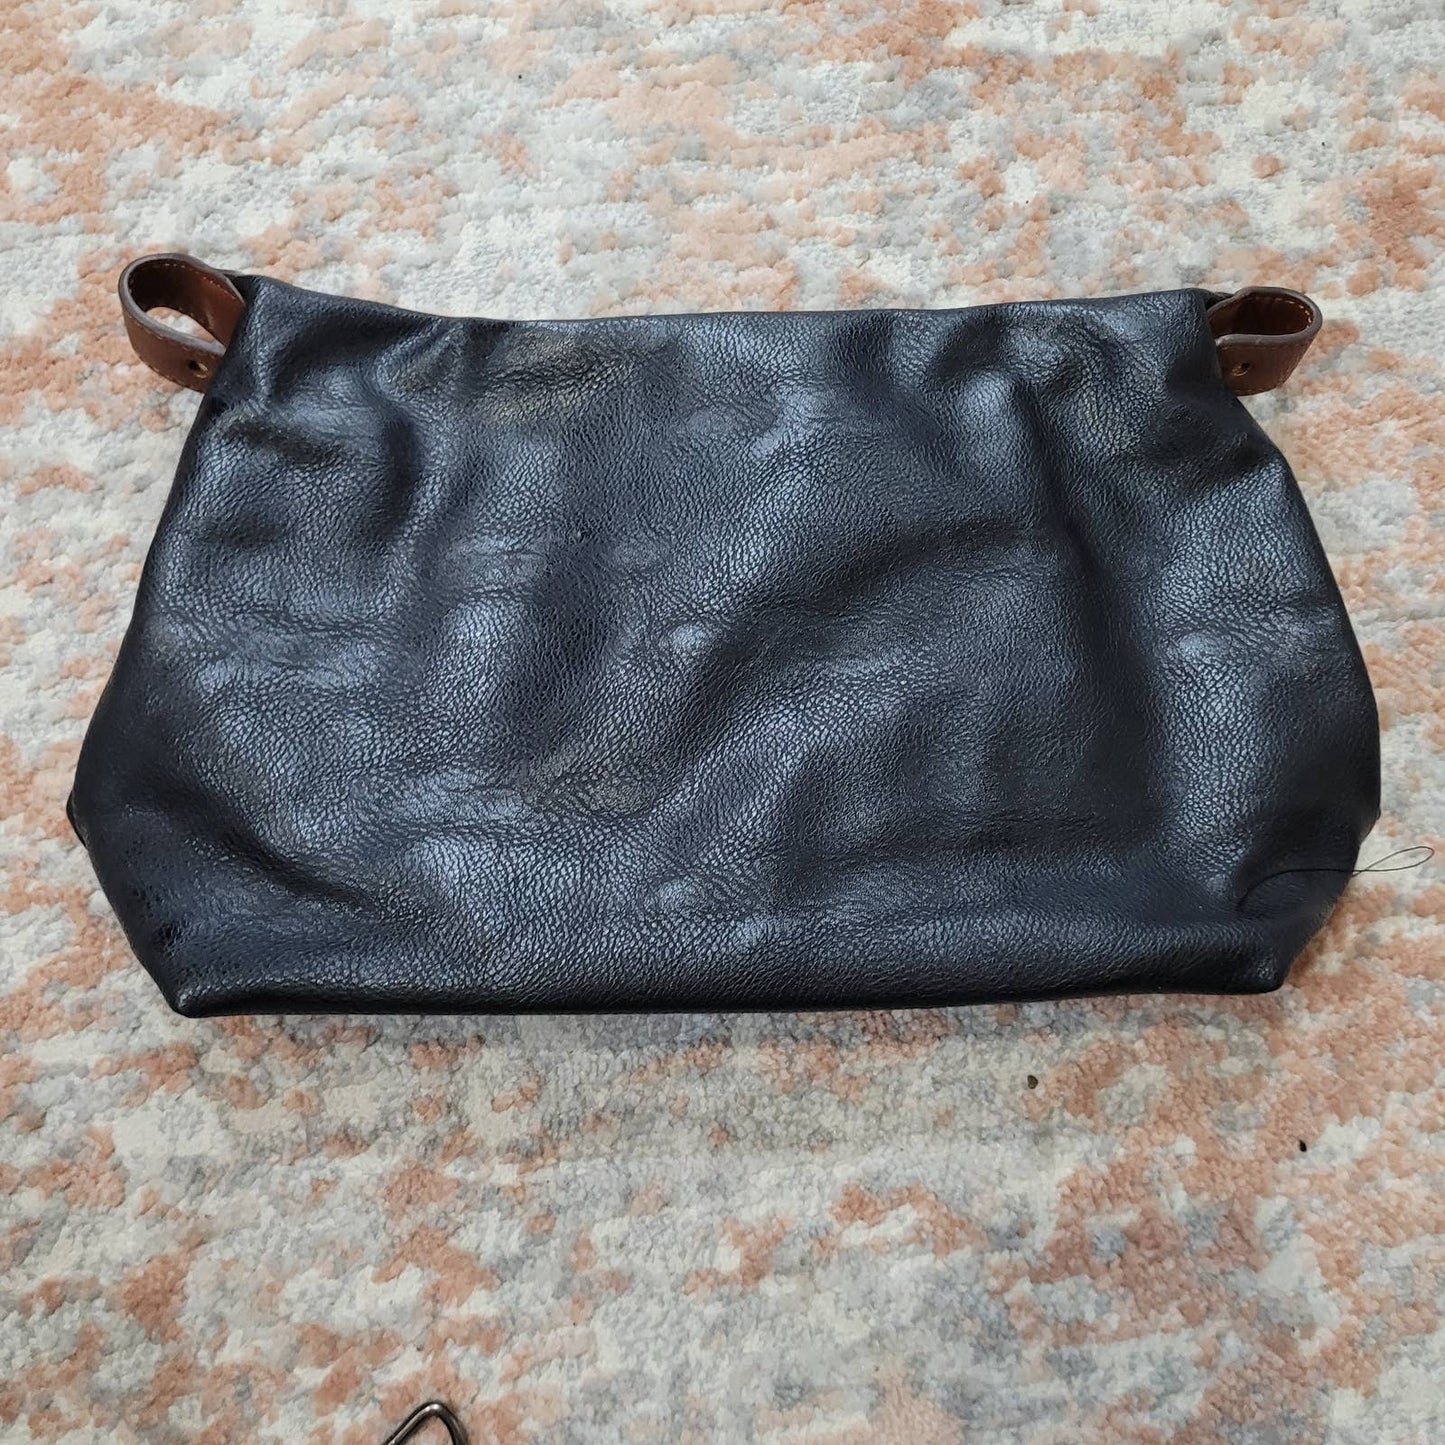 Clarks Black and Brown Leather Purse with Removable Clutch